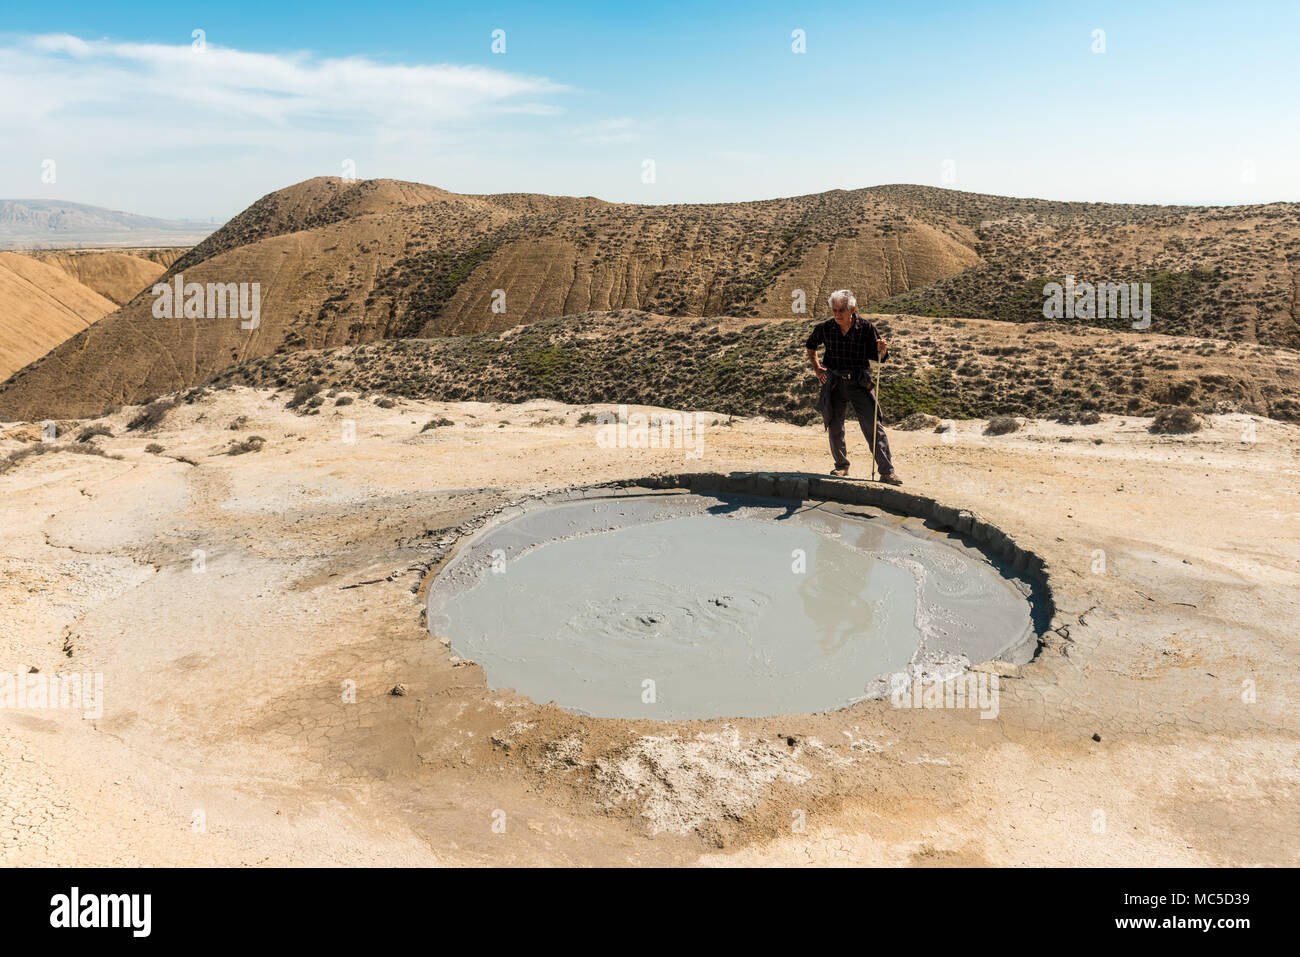 A traveler near the crater of a mud volcano Stock Photo